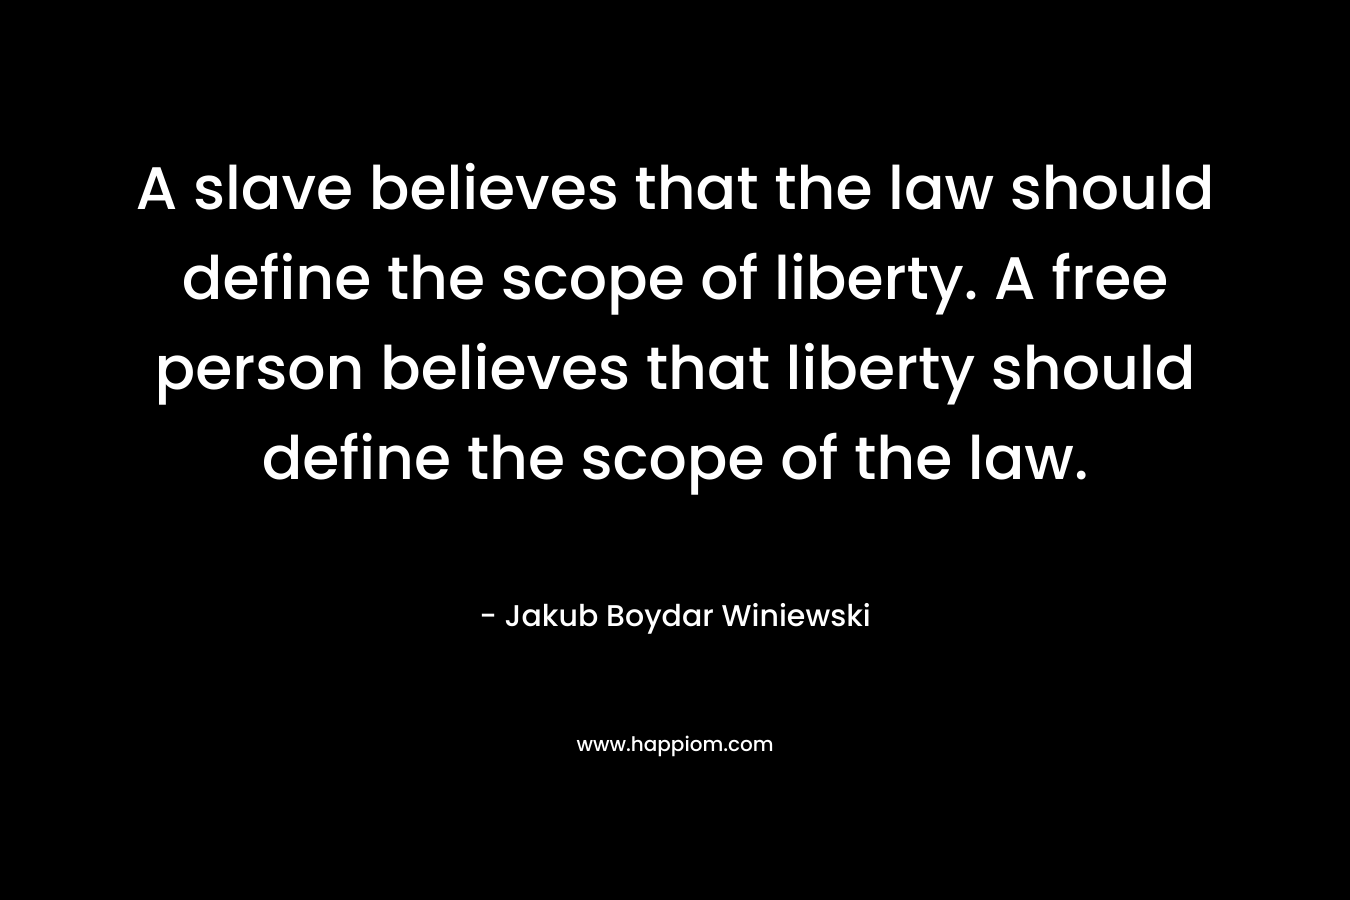 A slave believes that the law should define the scope of liberty. A free person believes that liberty should define the scope of the law. – Jakub Boydar Winiewski